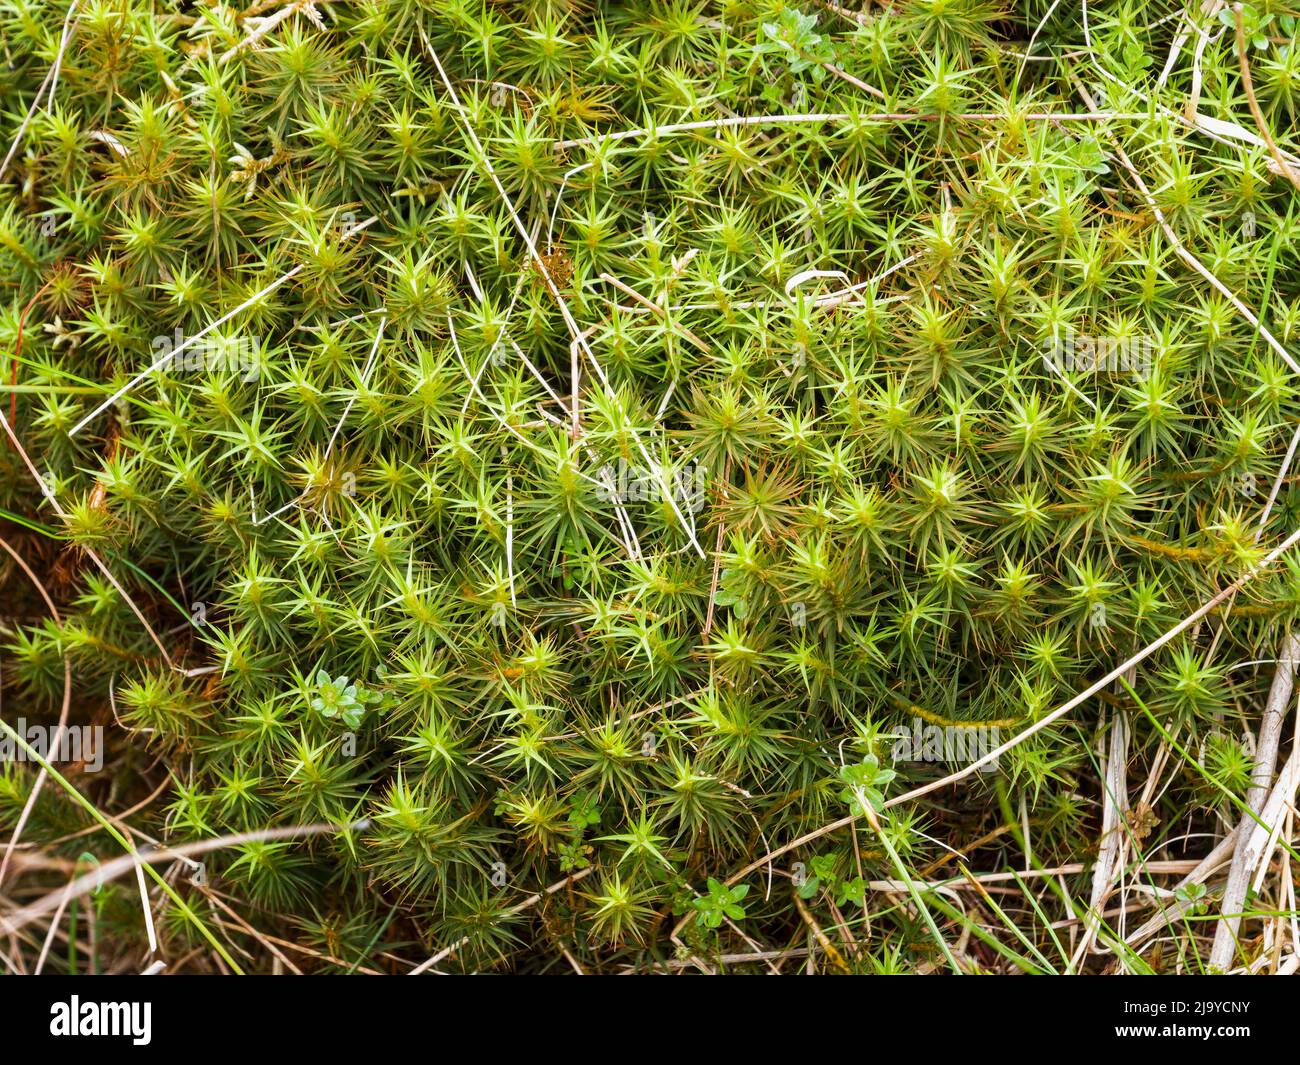 Haircap mosses, probably Polytrichum juniperinum, growing in Northumberland, UK Stock Photo